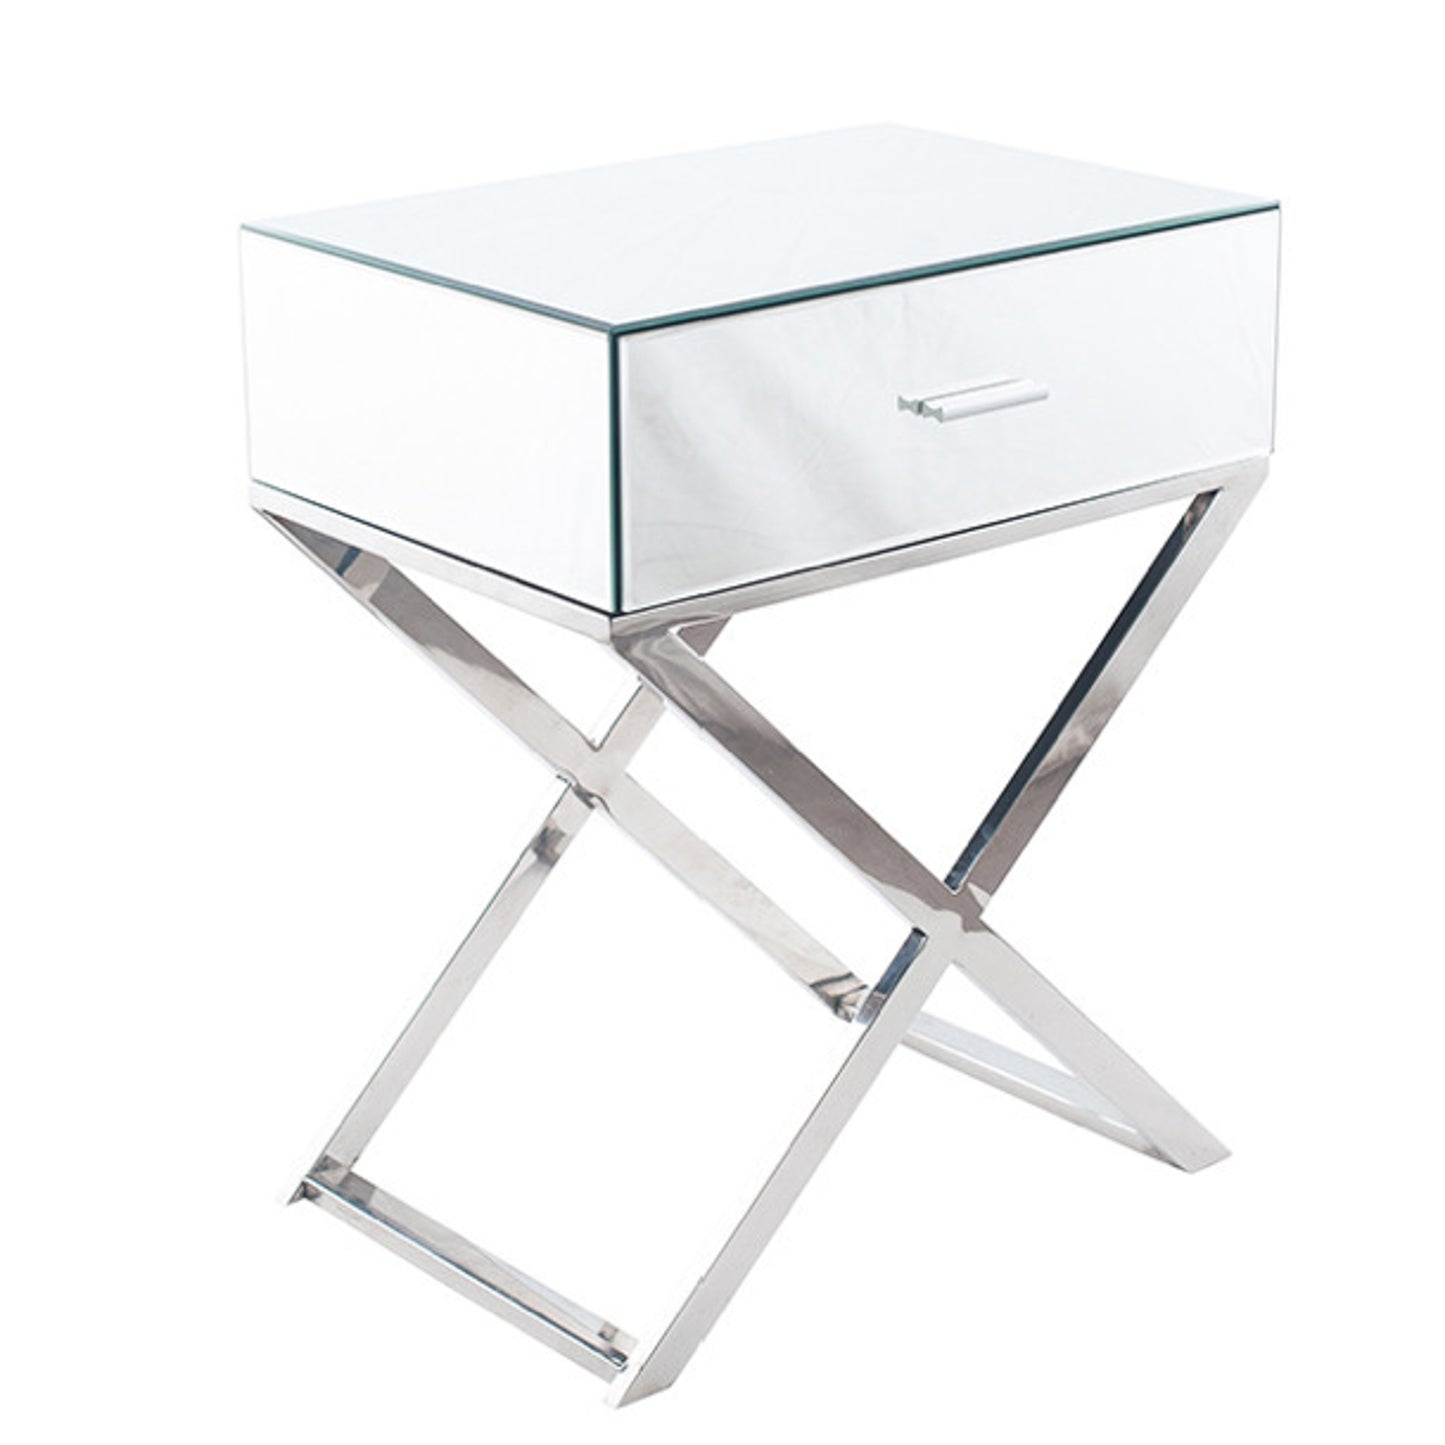 Rocca Mirrired Bedside Table